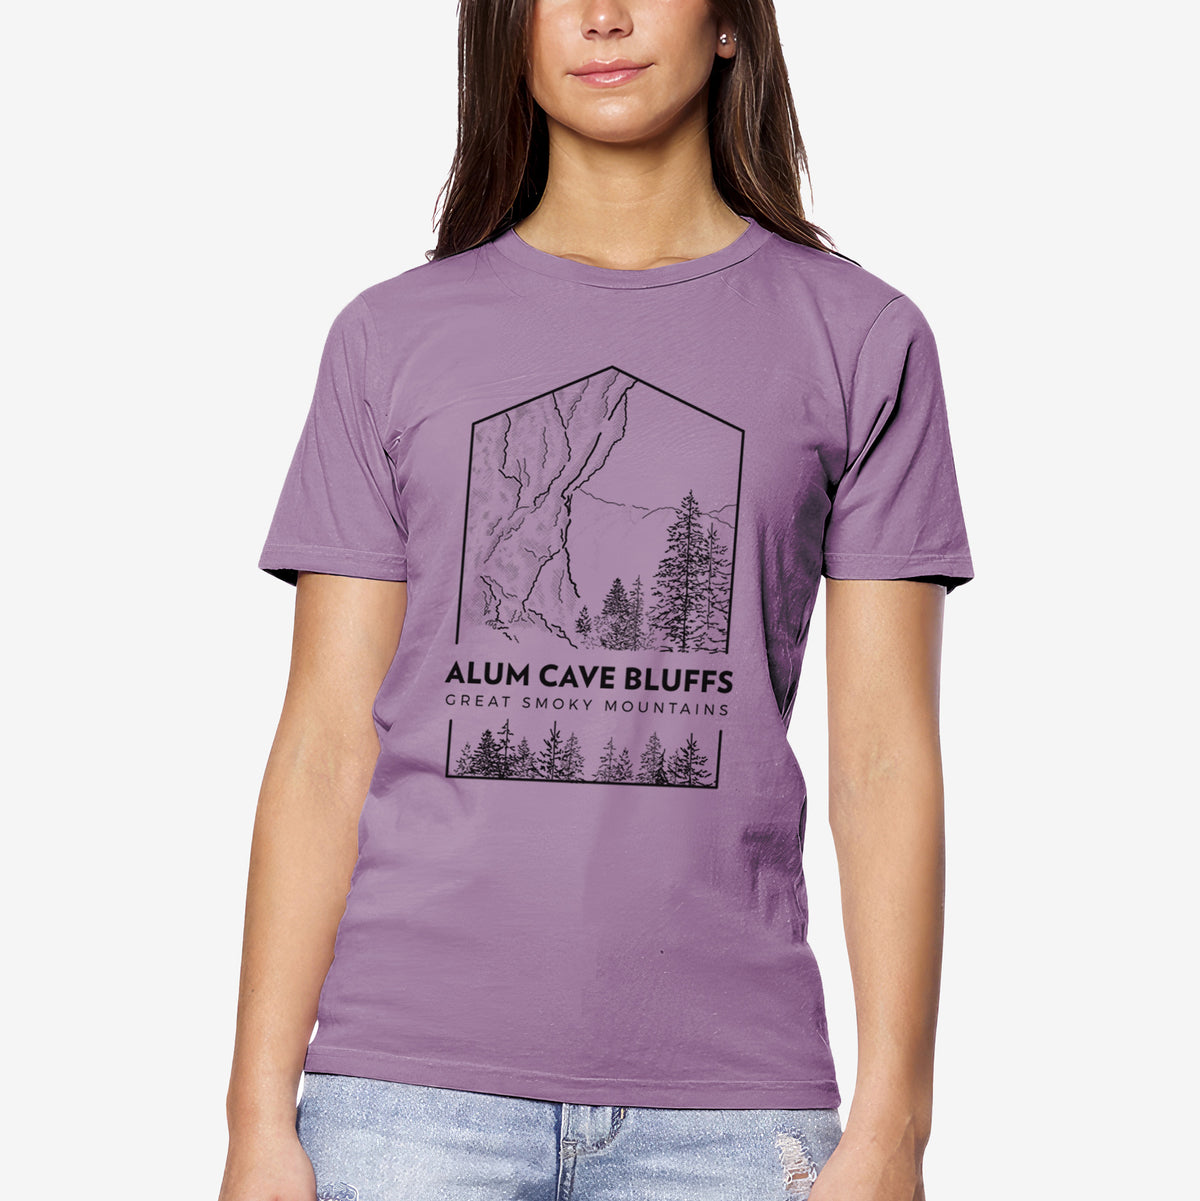 Alum Cave Bluffs - Great Smoky Mountains National Park - Unisex Crewneck - Made in USA - 100% Organic Cotton